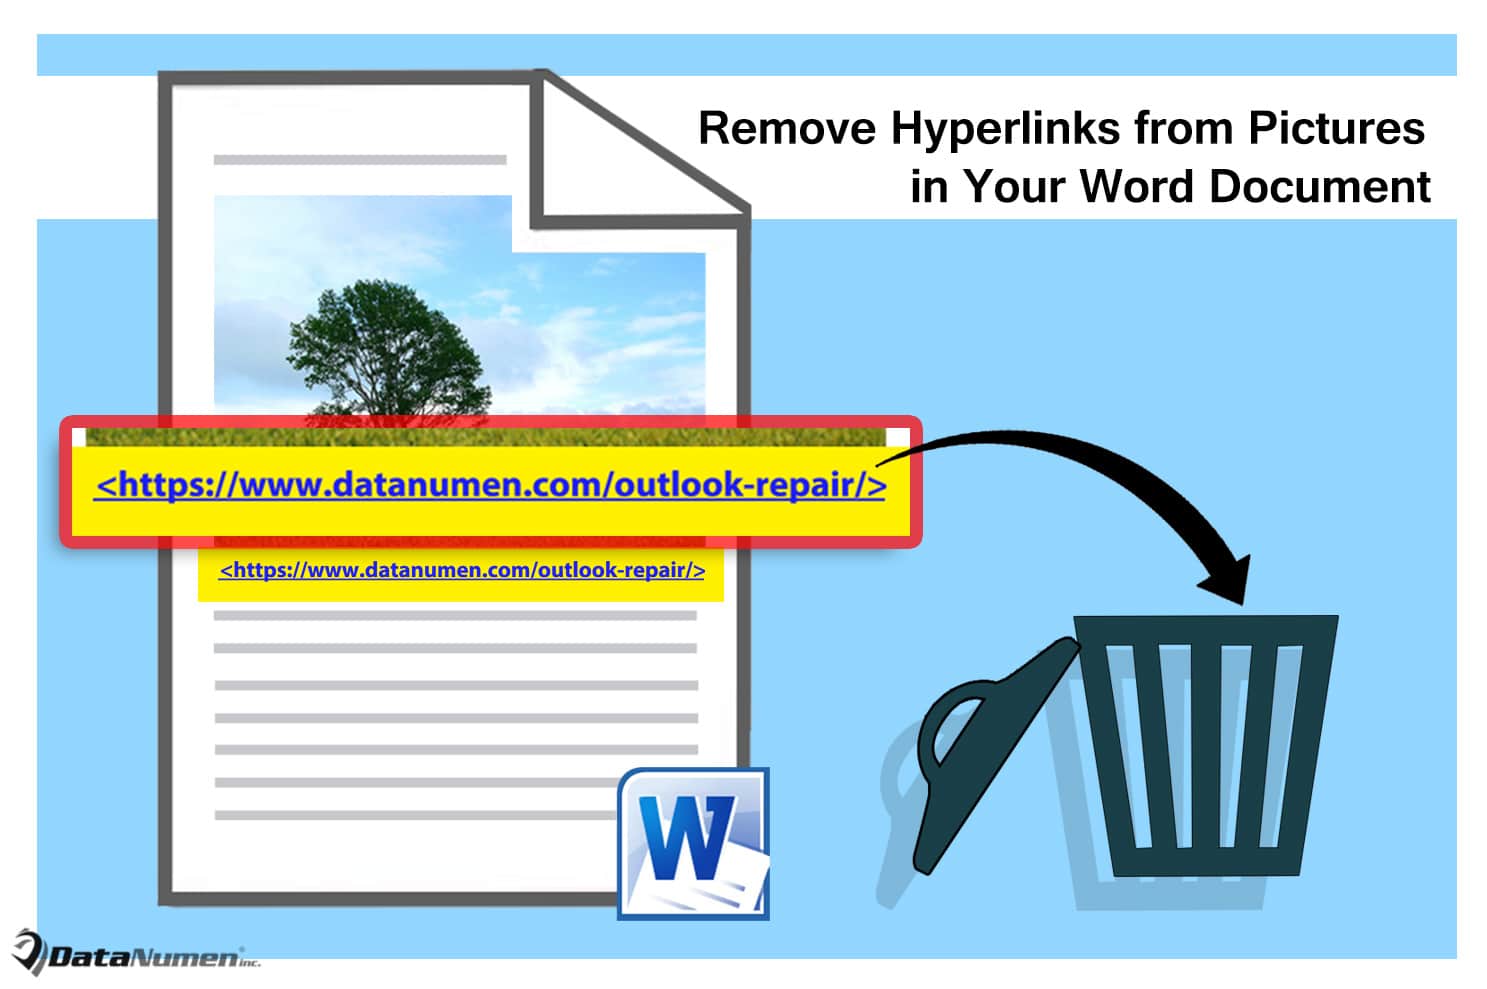 Remove Hyperlinks from Pictures in Your Word Document